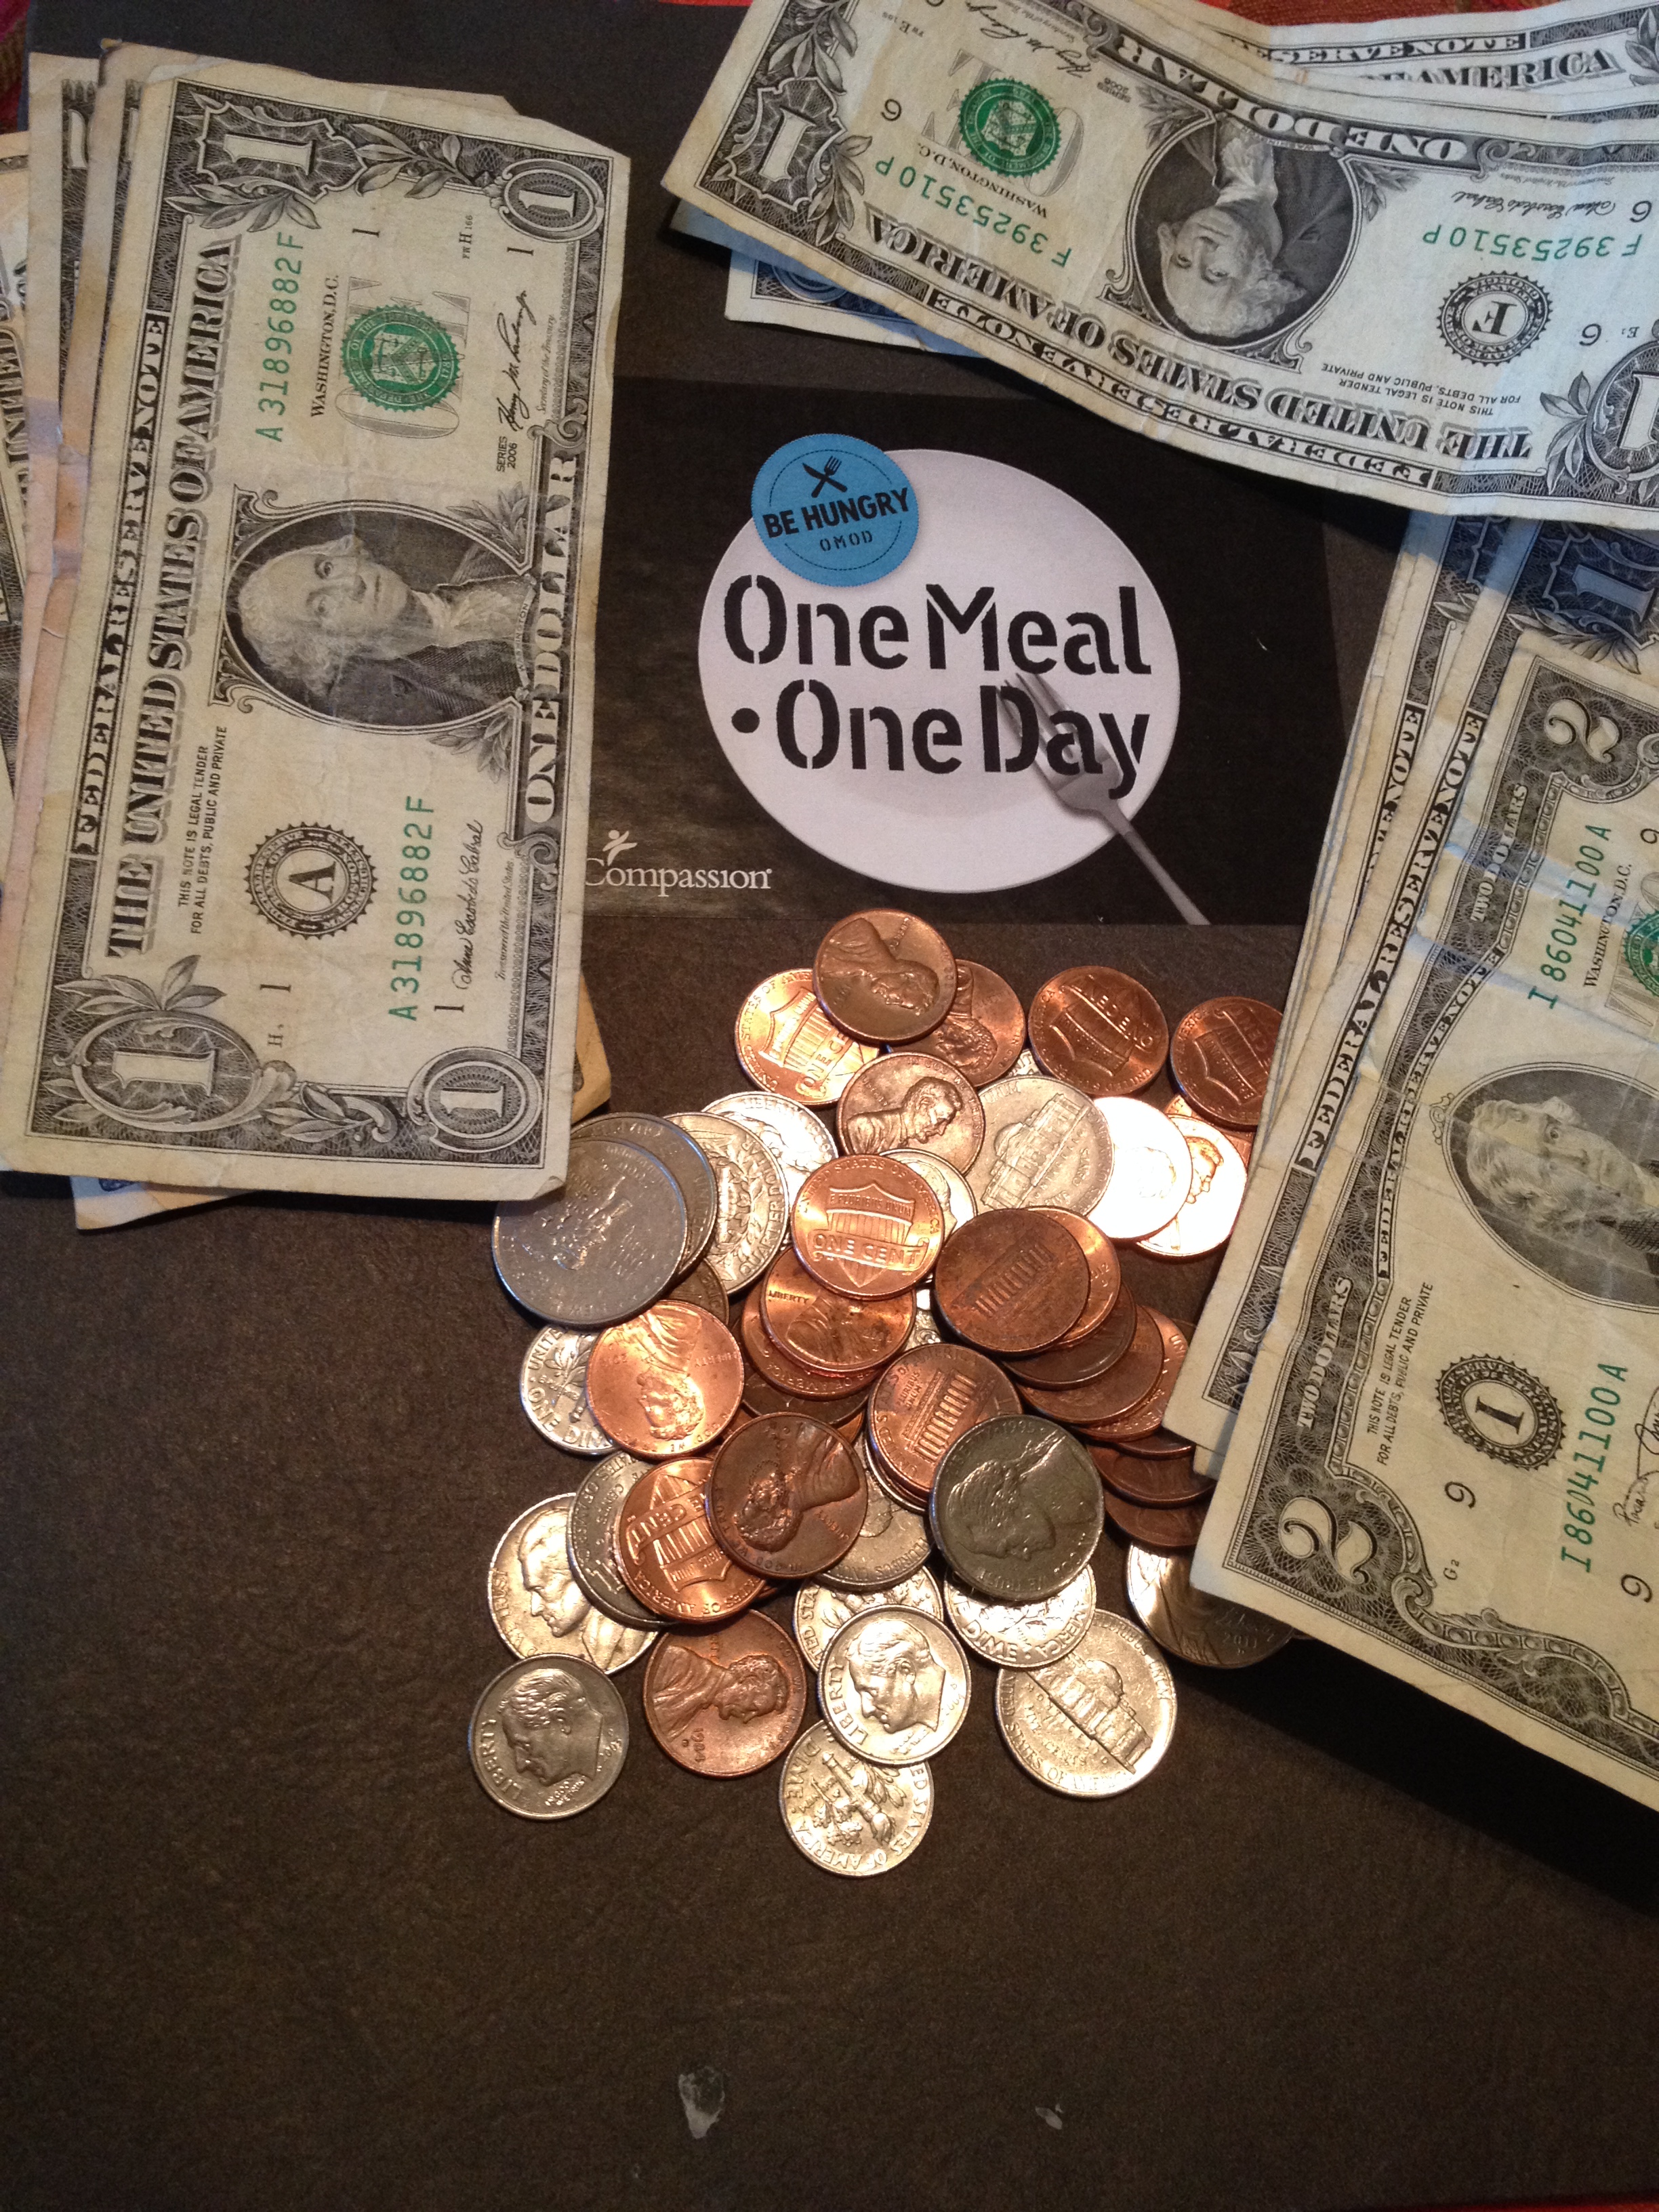 Youth group raised money for One Meal One Day